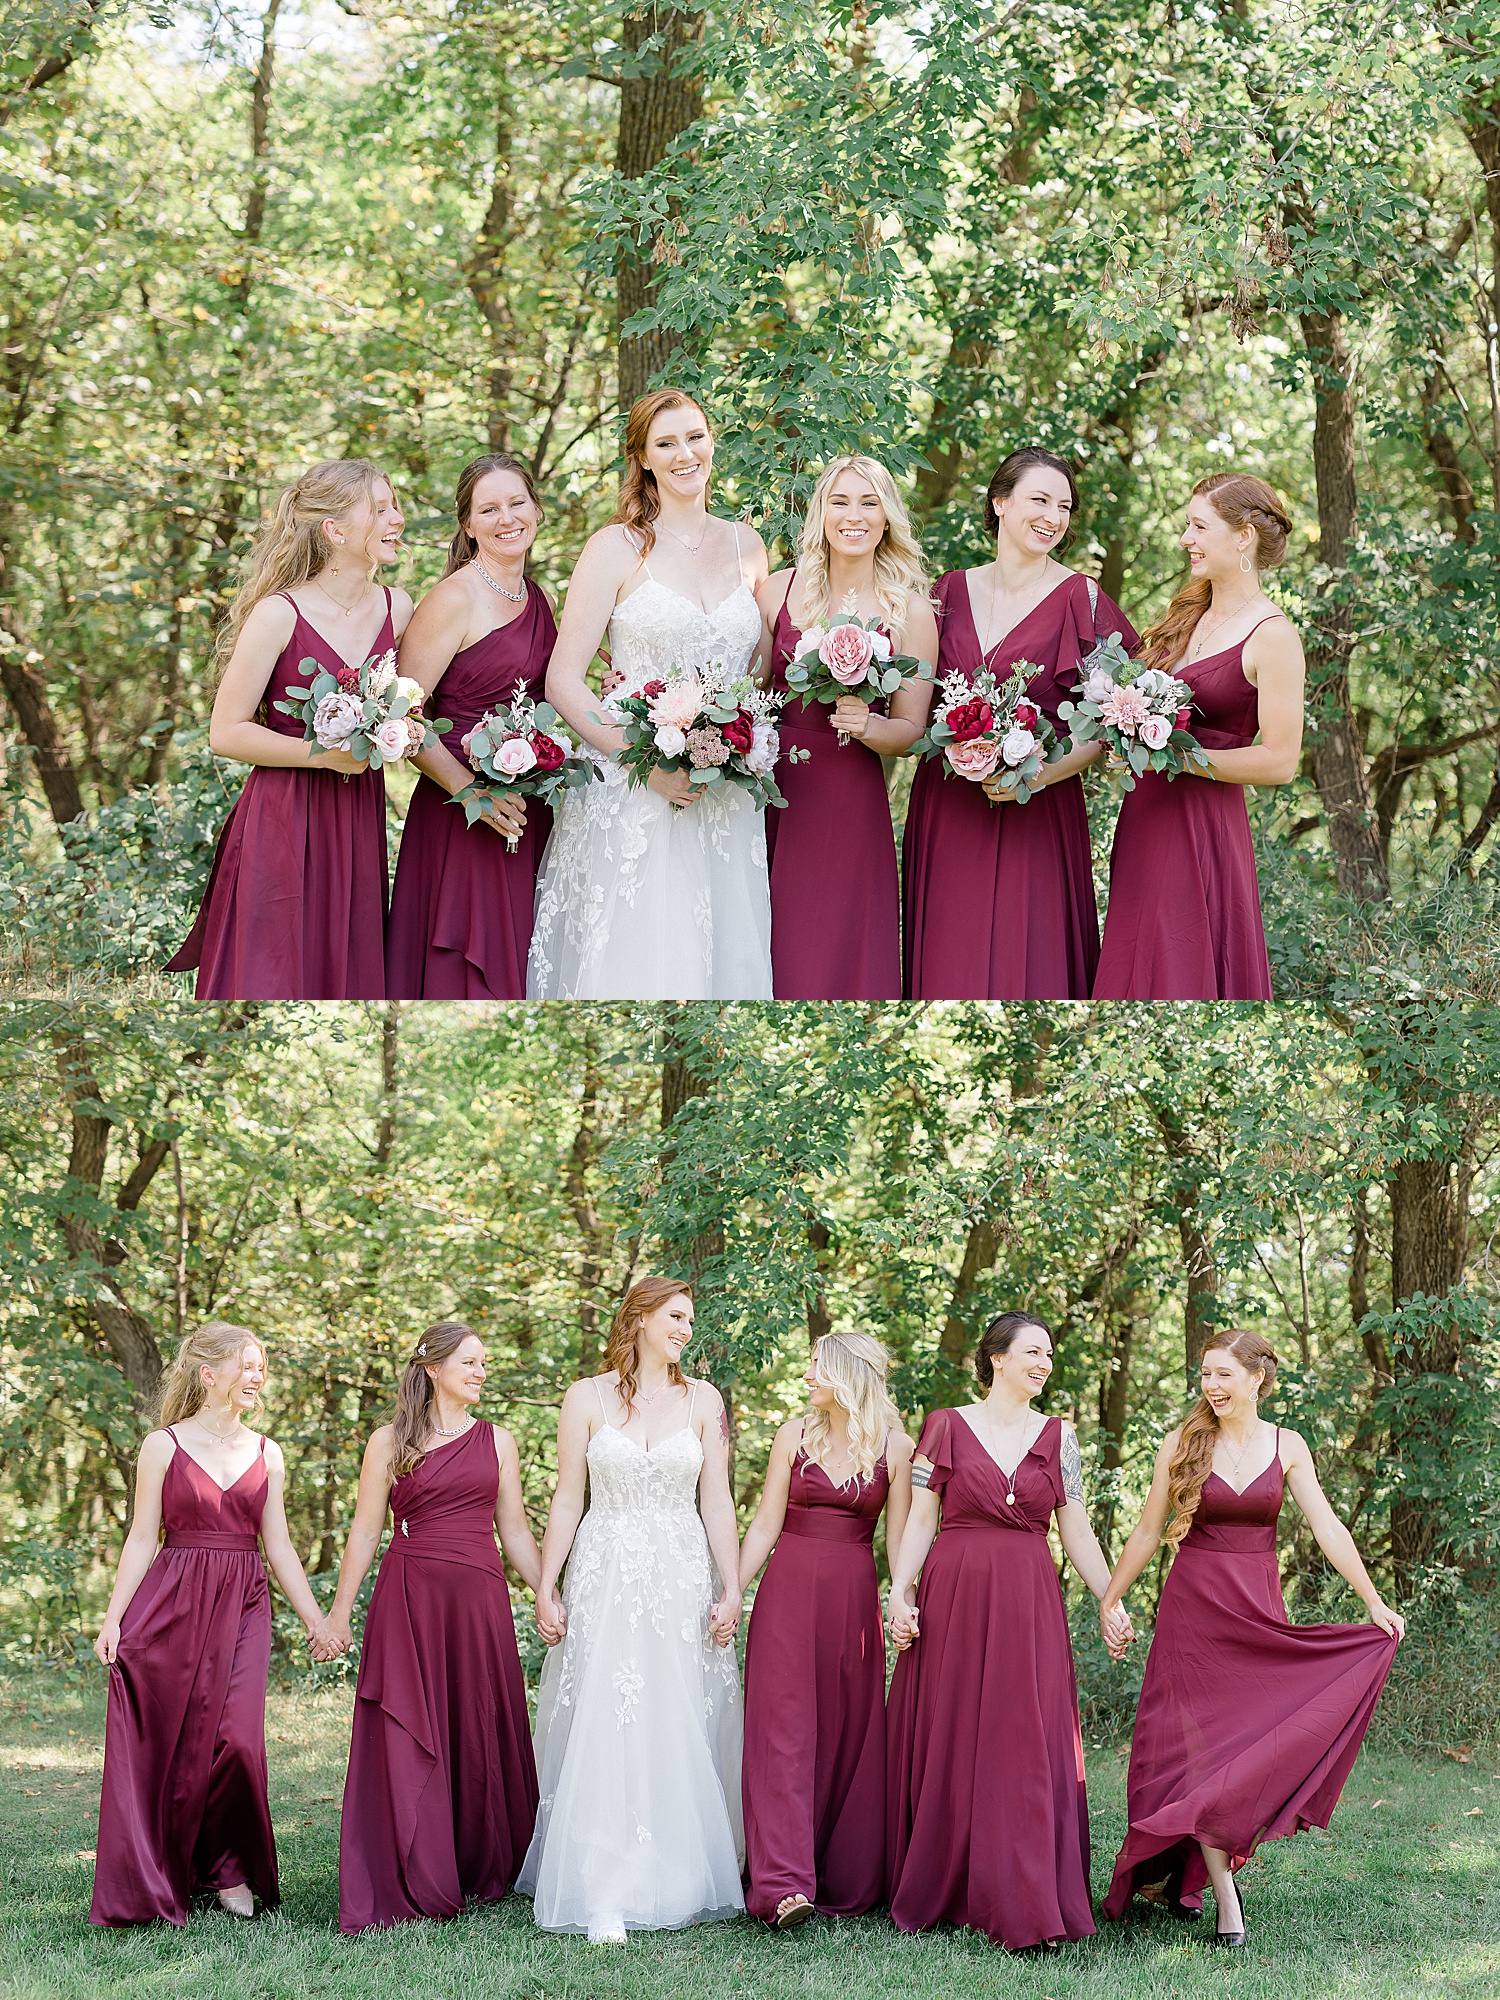 Bride and bridesmaids wearing red dresses while holding floral wedding bouquets 